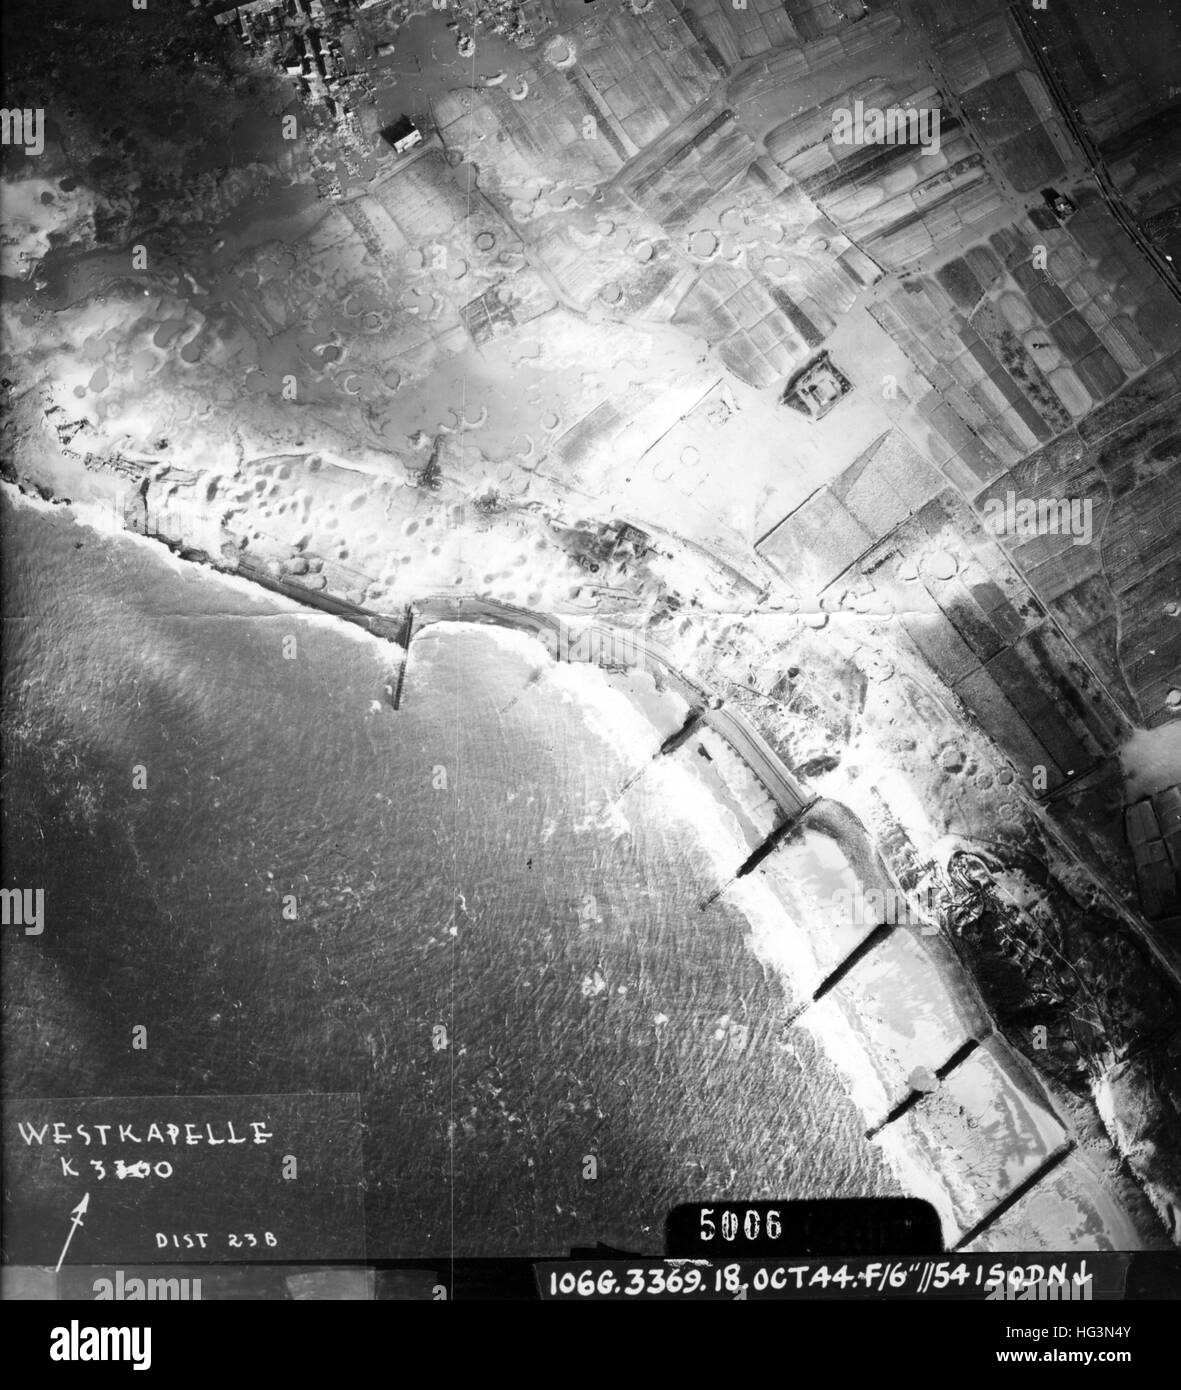 WESTKAPELLE, Holland. Photo reconnaissance by 541 Squadron RAF on 18 October 1944 showing bomb craters from the daylight attack by 227 Squadron RAF and others the previous day intended to breach the dykes and isolate German positions by flooding Stock Photo